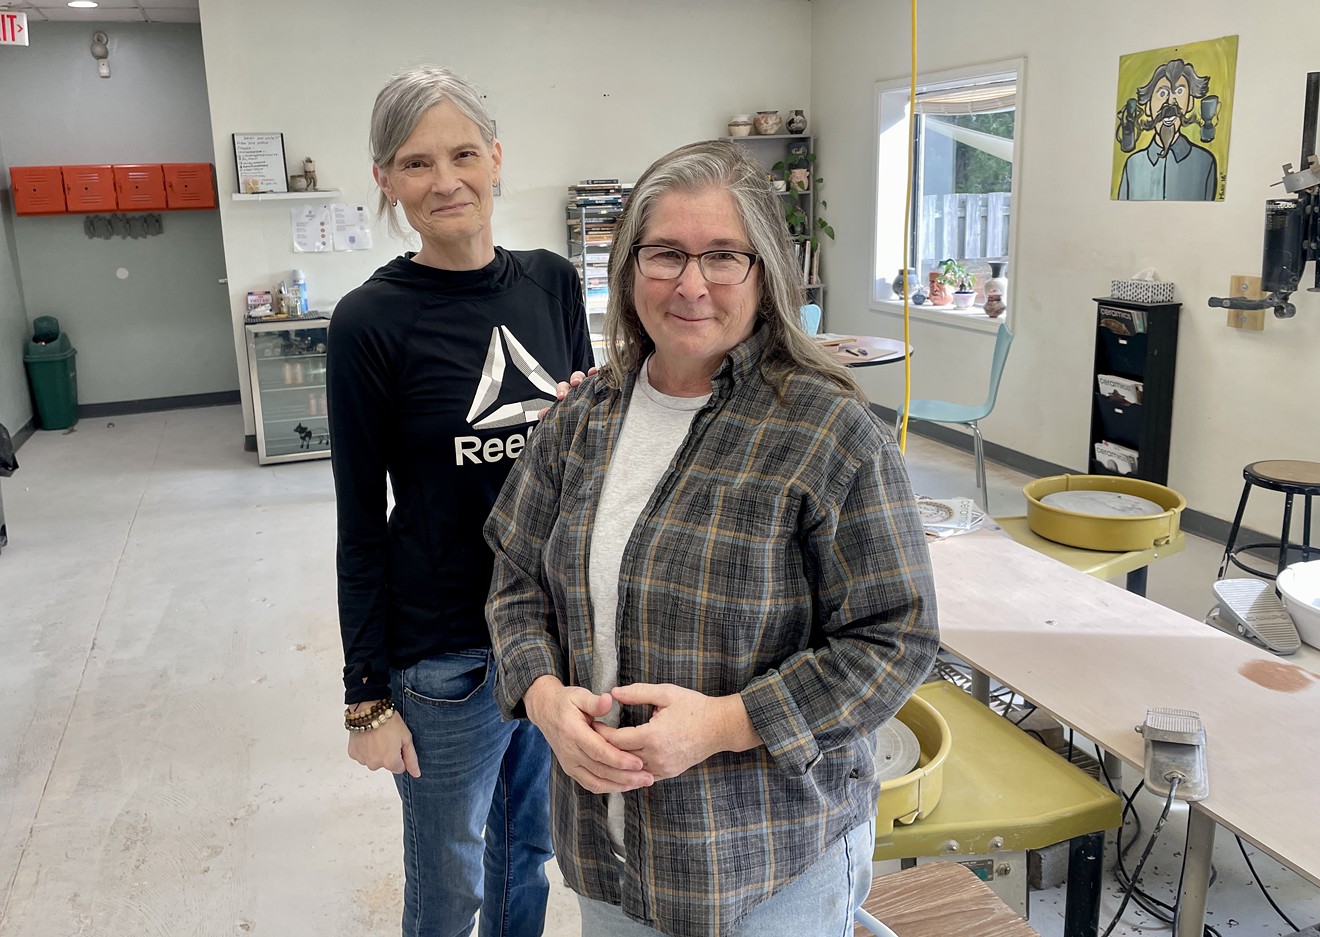 Clair Buckner (front) and Wendy Melton in the open studio of Clayer & Co.